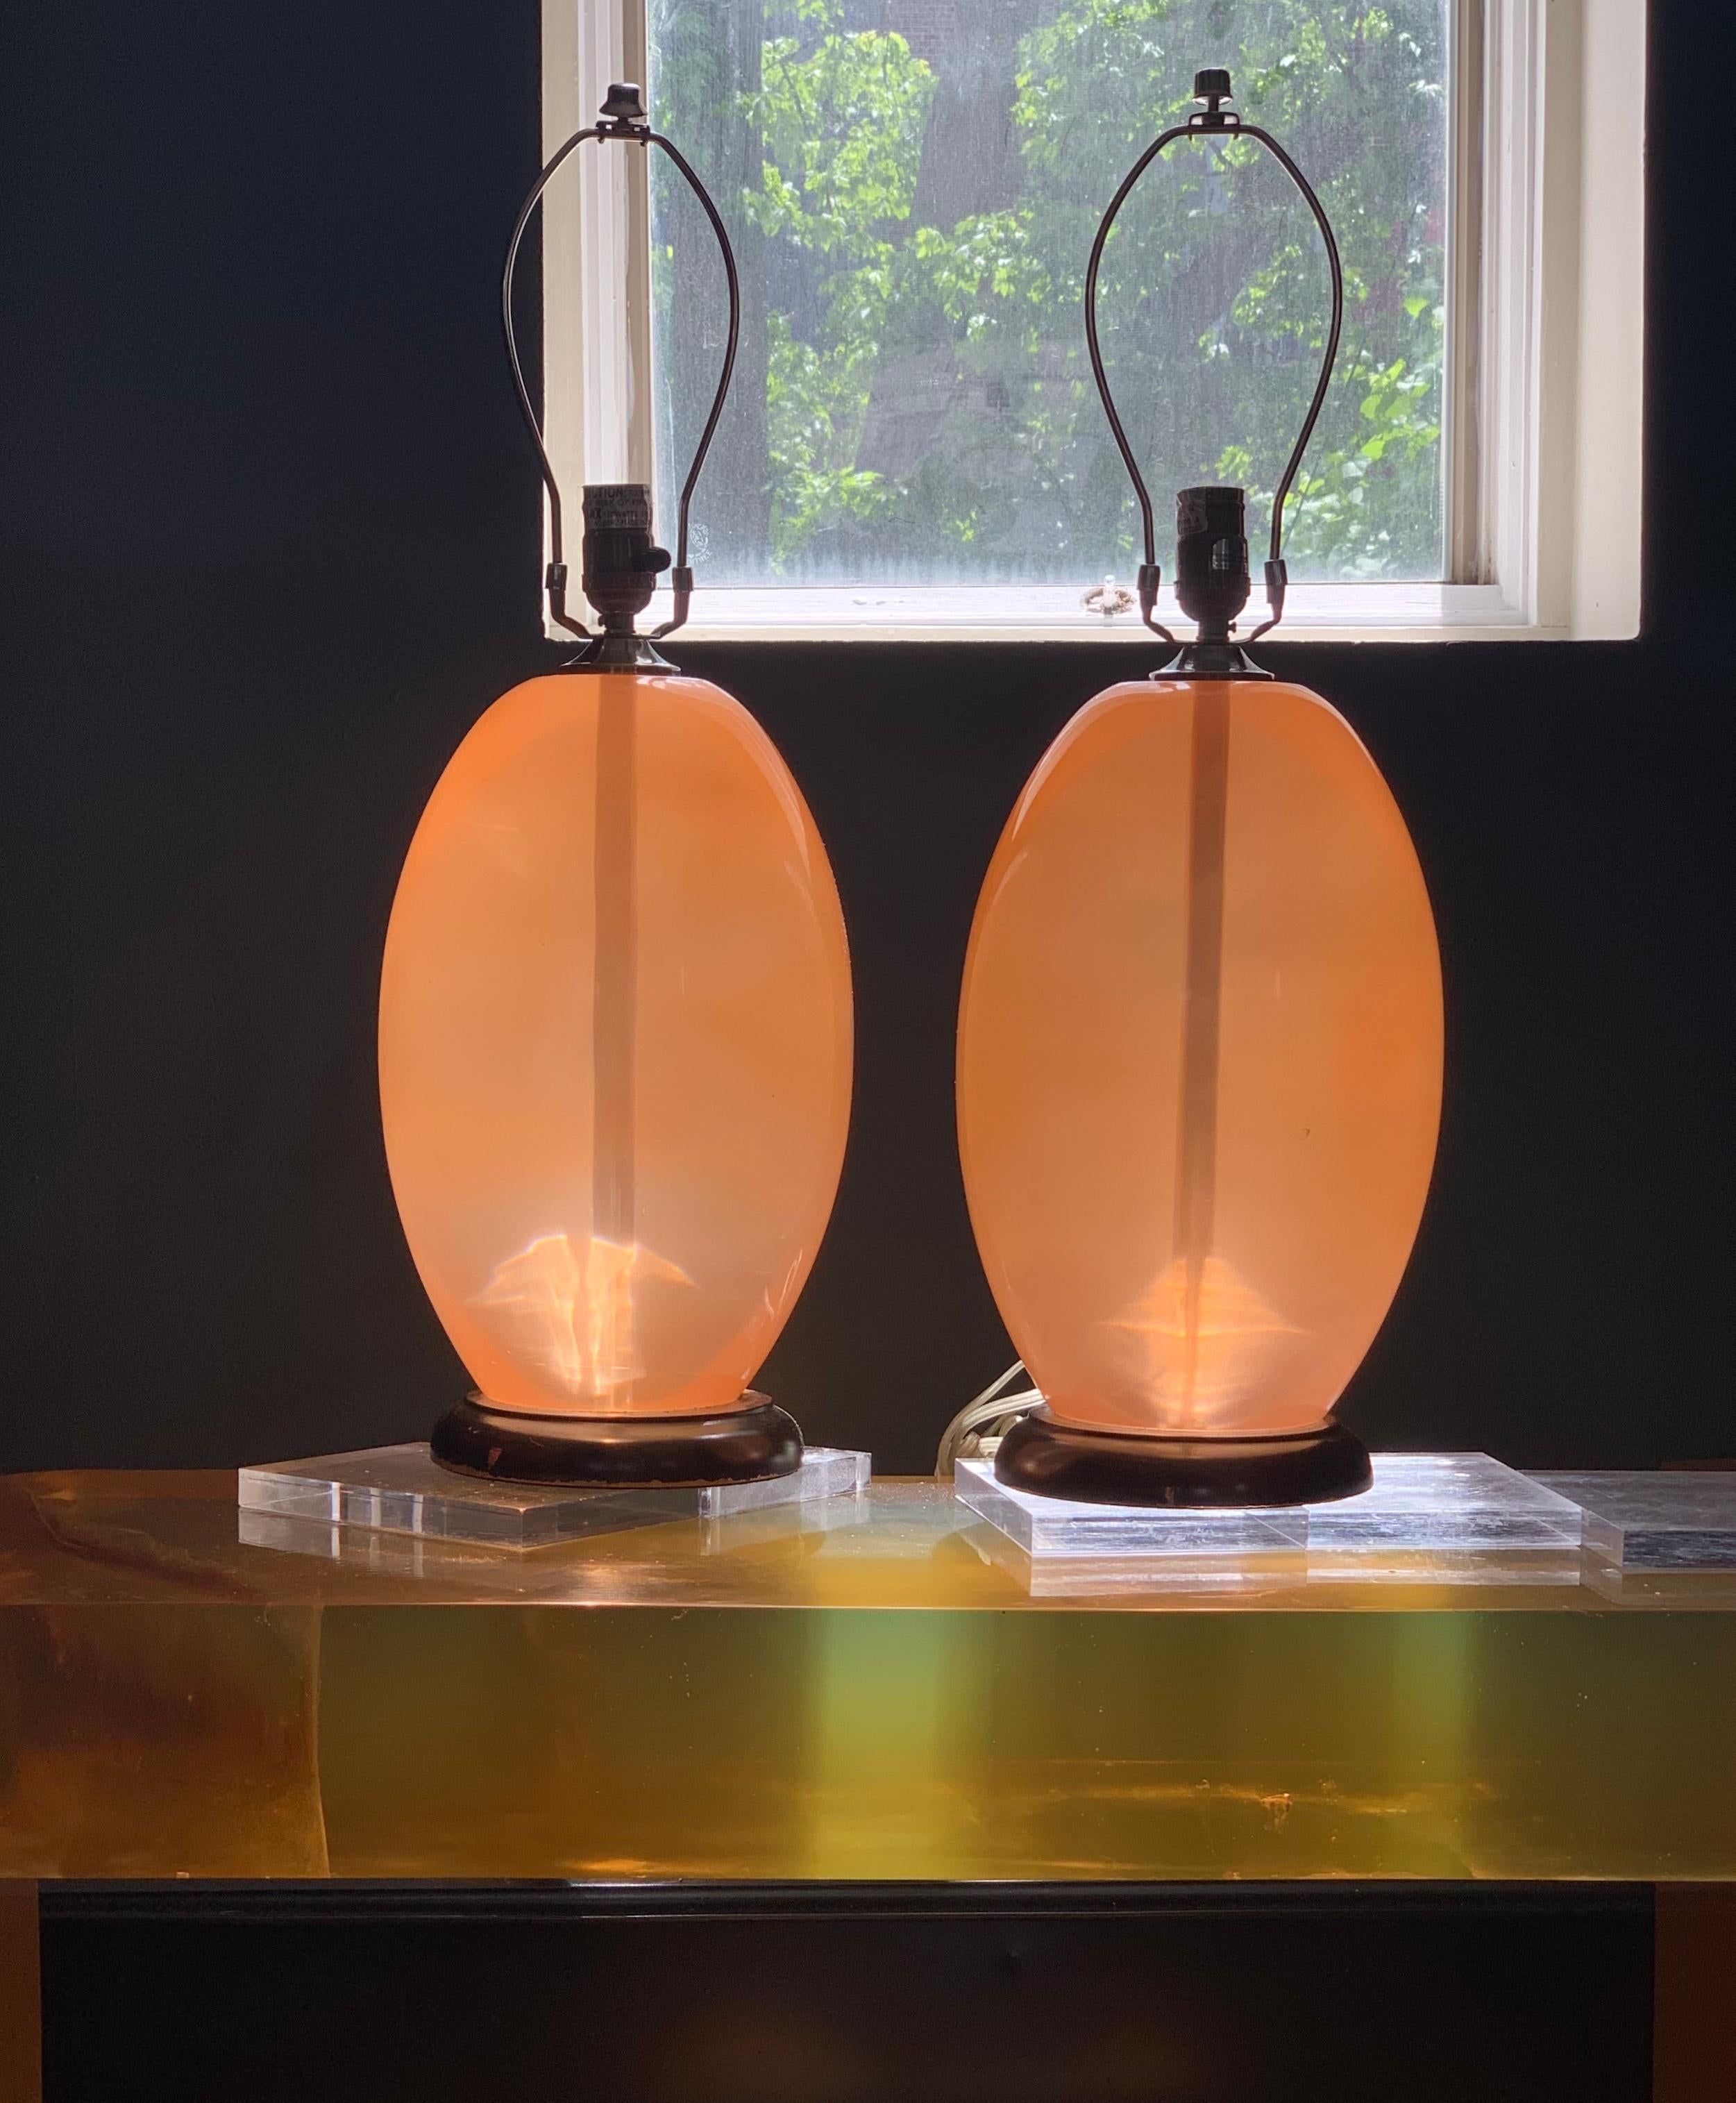 Midcentury monumental ostrich-egg pink Lucite or Resin or Acrylic modern sculptural table lamp. Wood base. Listing is for single lamp. Two available. Landshades NOT included.